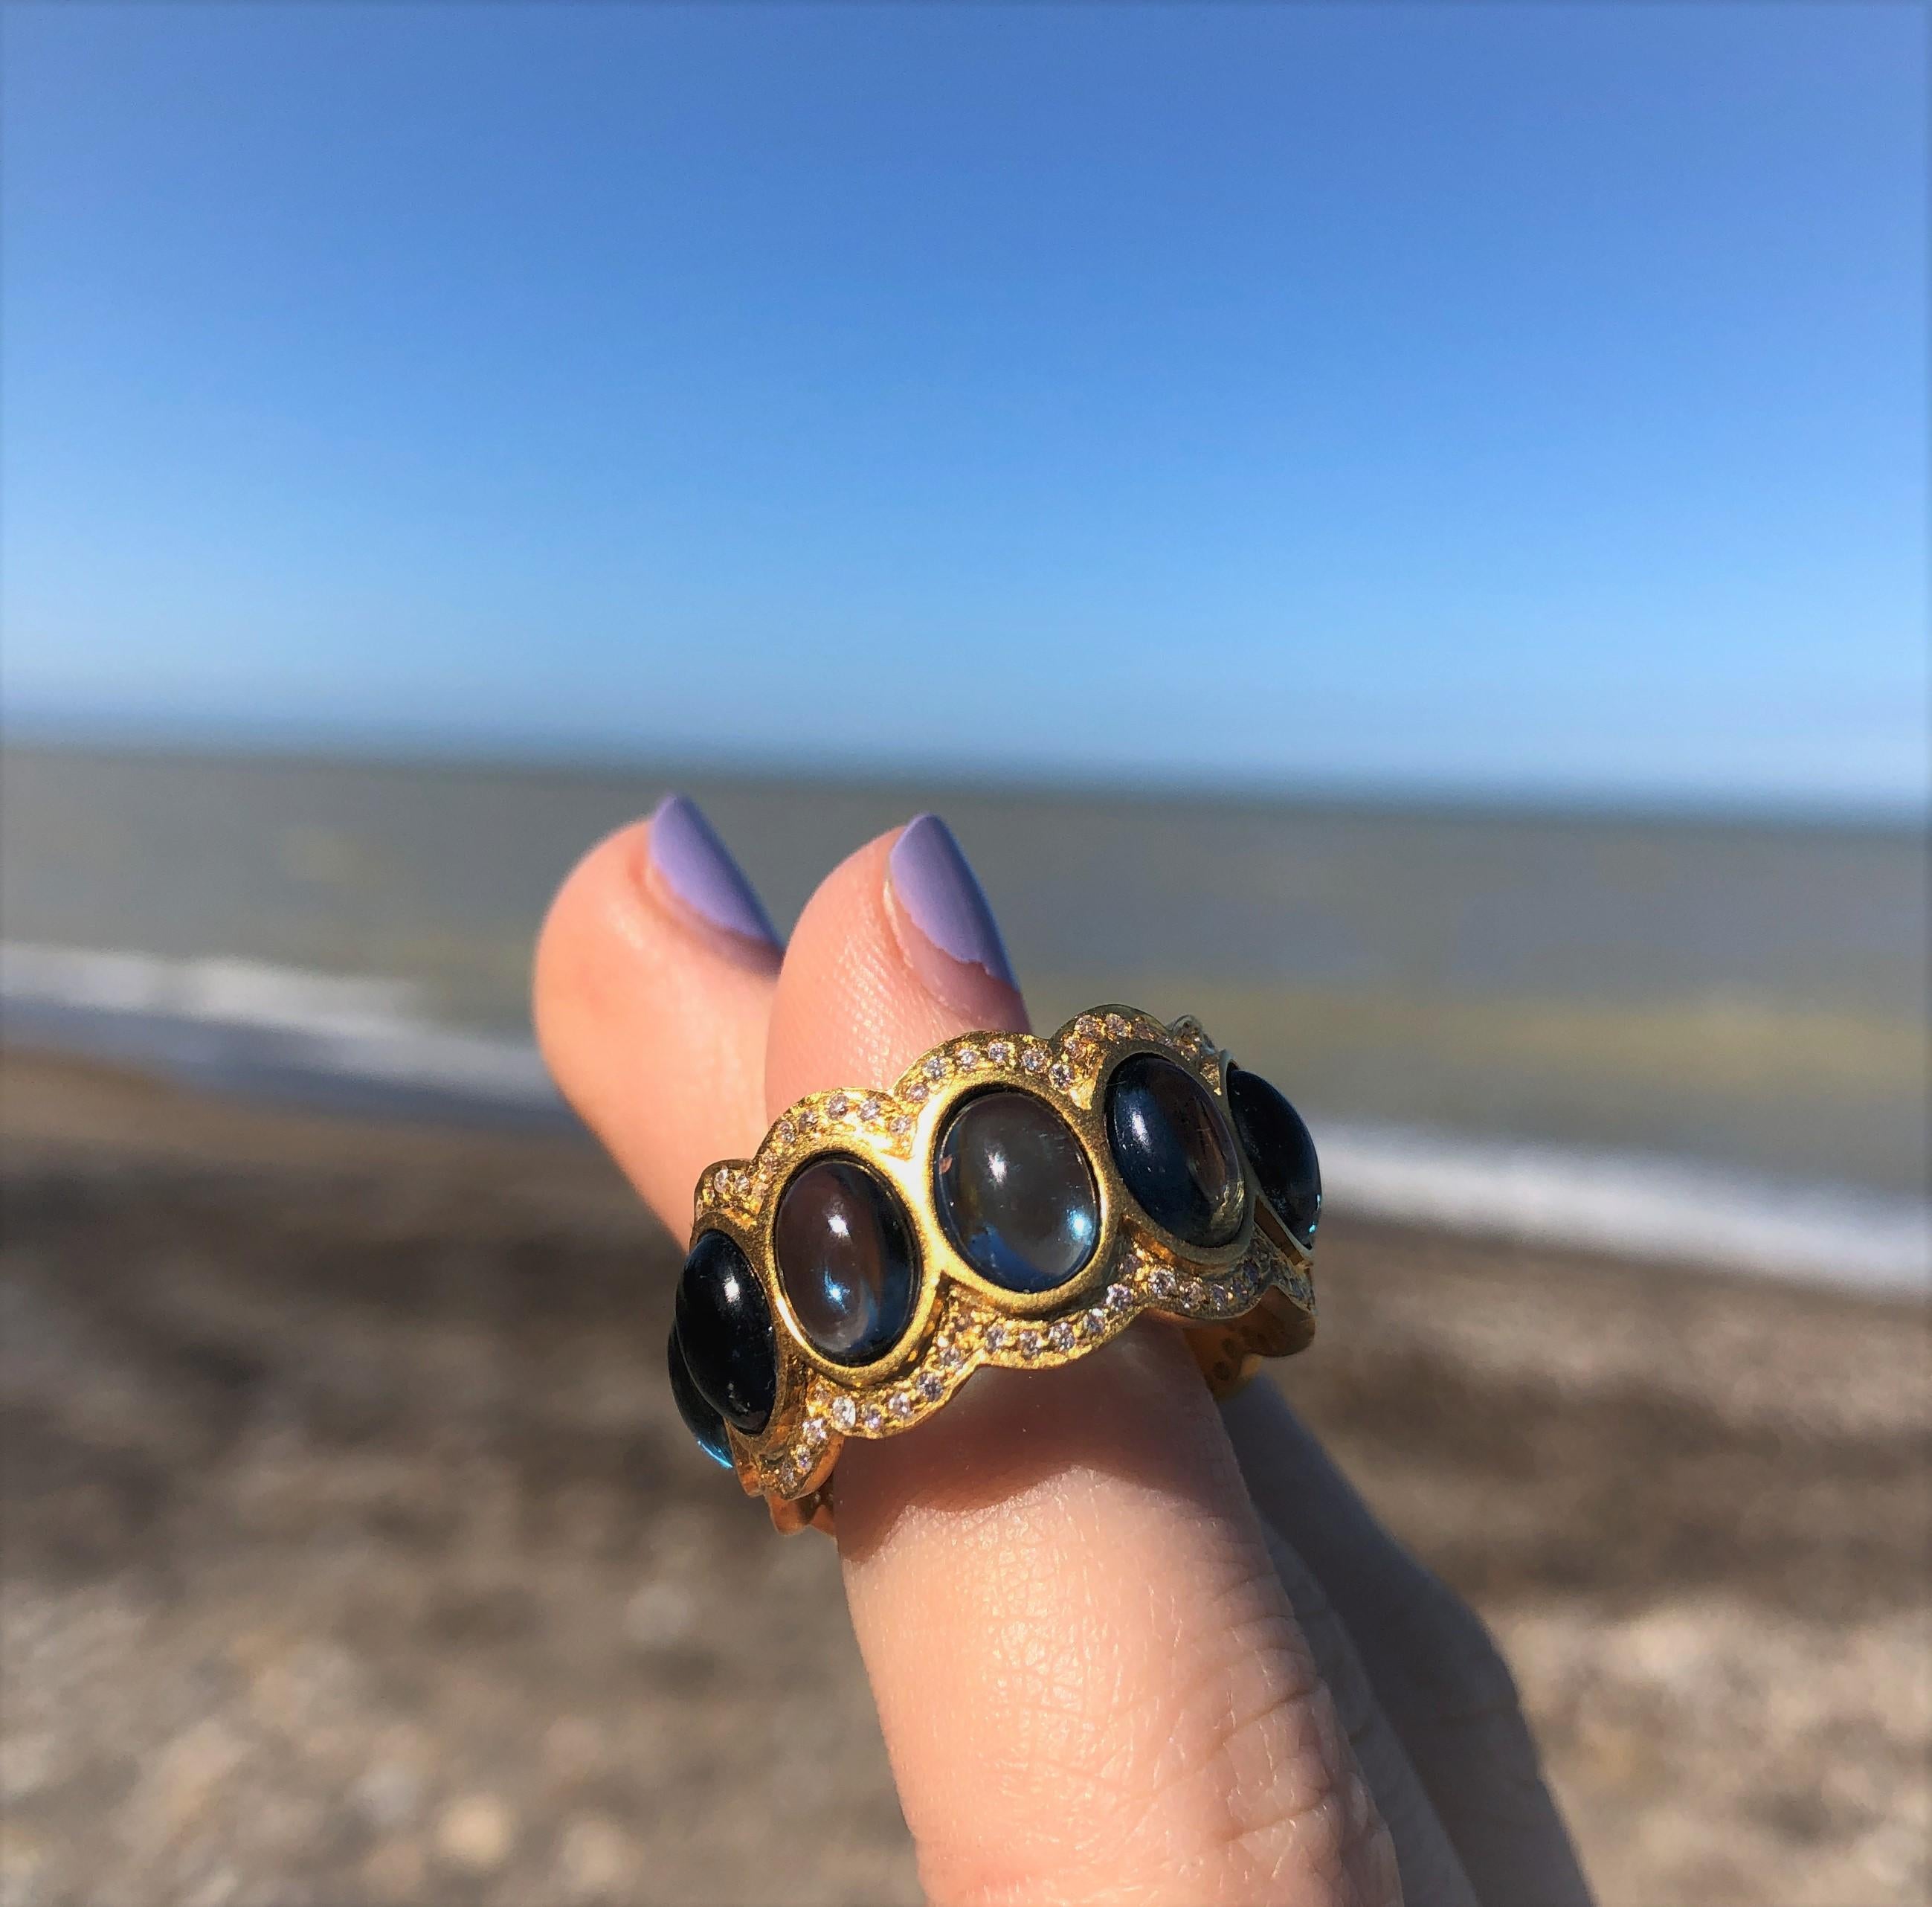 Designed by award winning jewelry designer, Lauren Harper, this eternity band glows with beautiful cabachon London Blue Topaz ovals, surrounded by diamonds and 18kt Gold. Comfortable on the finger, and a great finishing touch to every outfit. Size